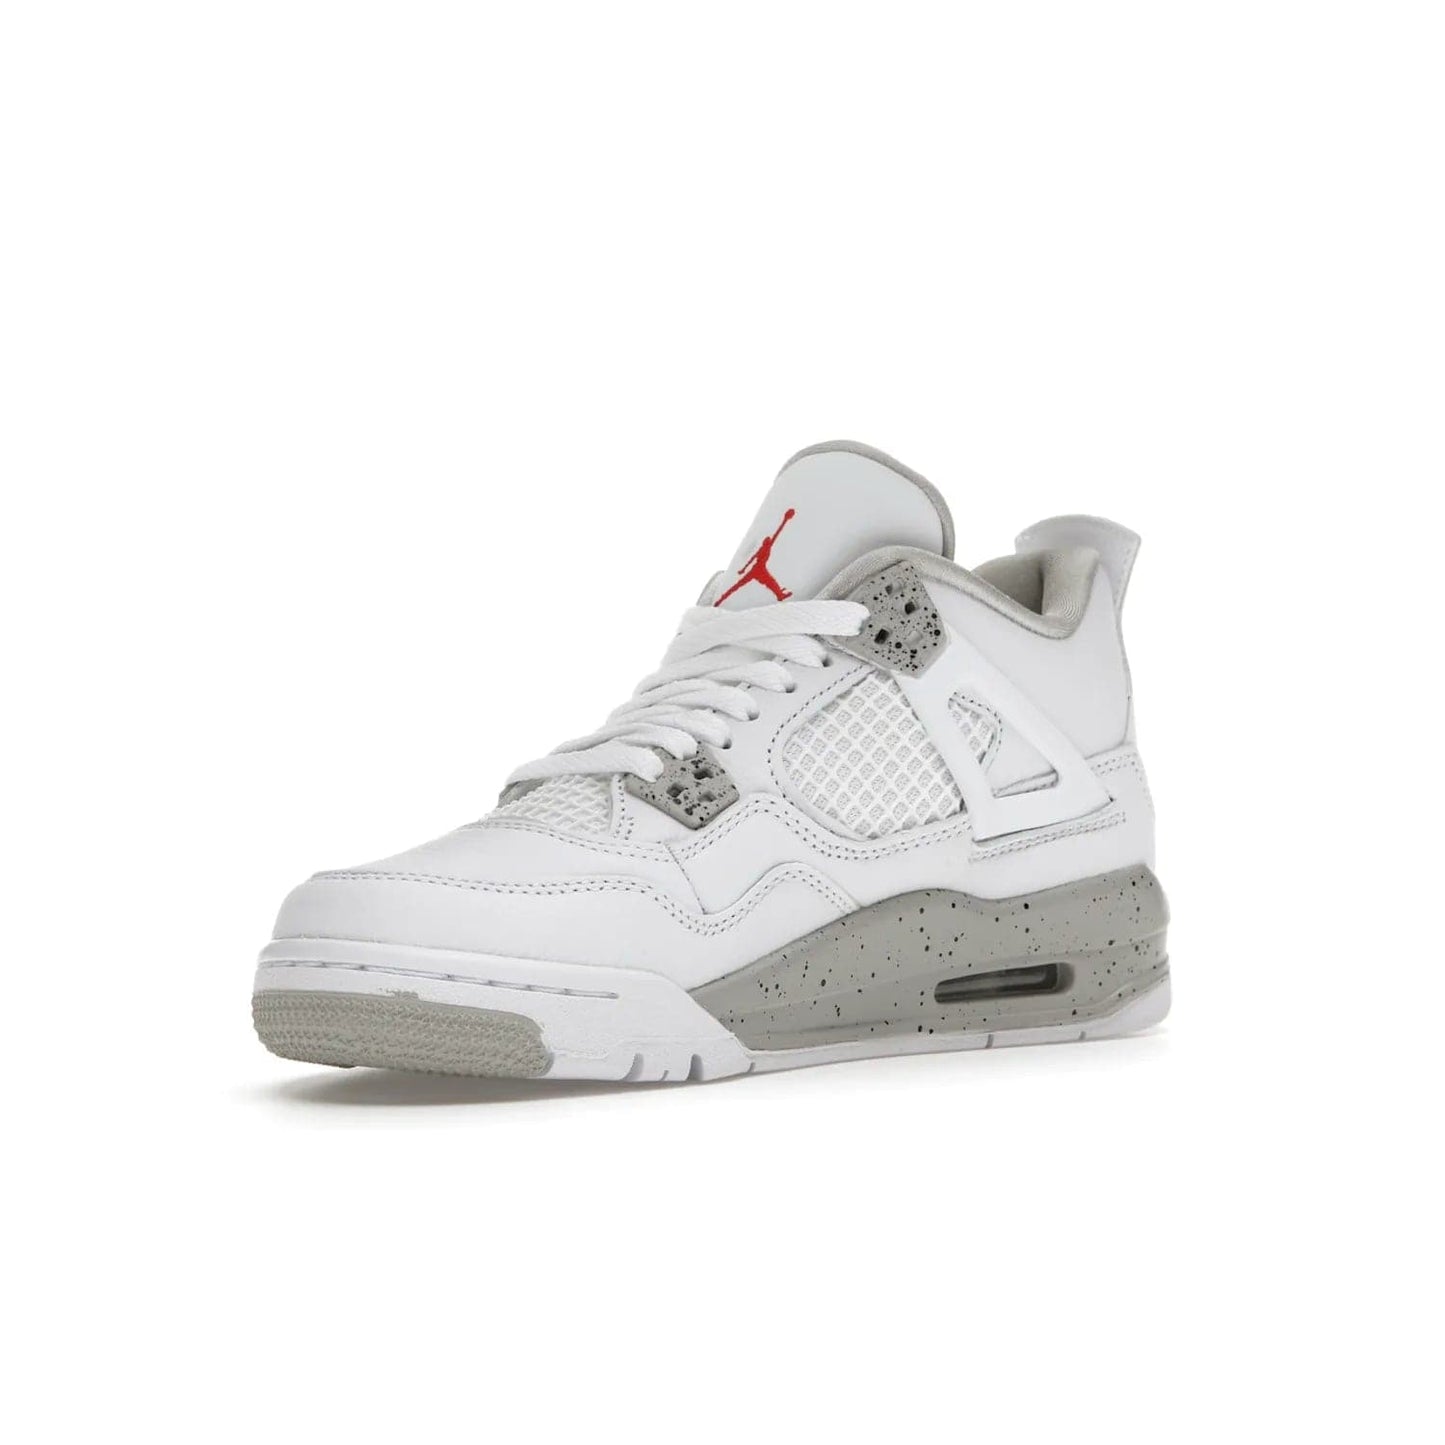 Jordan 4 Retro White Oreo (2021) (GS) - Image 15 - Only at www.BallersClubKickz.com - White Oreo Air Jordan 4 Retro 2021 GS - Iconic sneaker silhouette with white canvas upper, Tech Grey detailing, and Fire Red accents. Available July 2021.